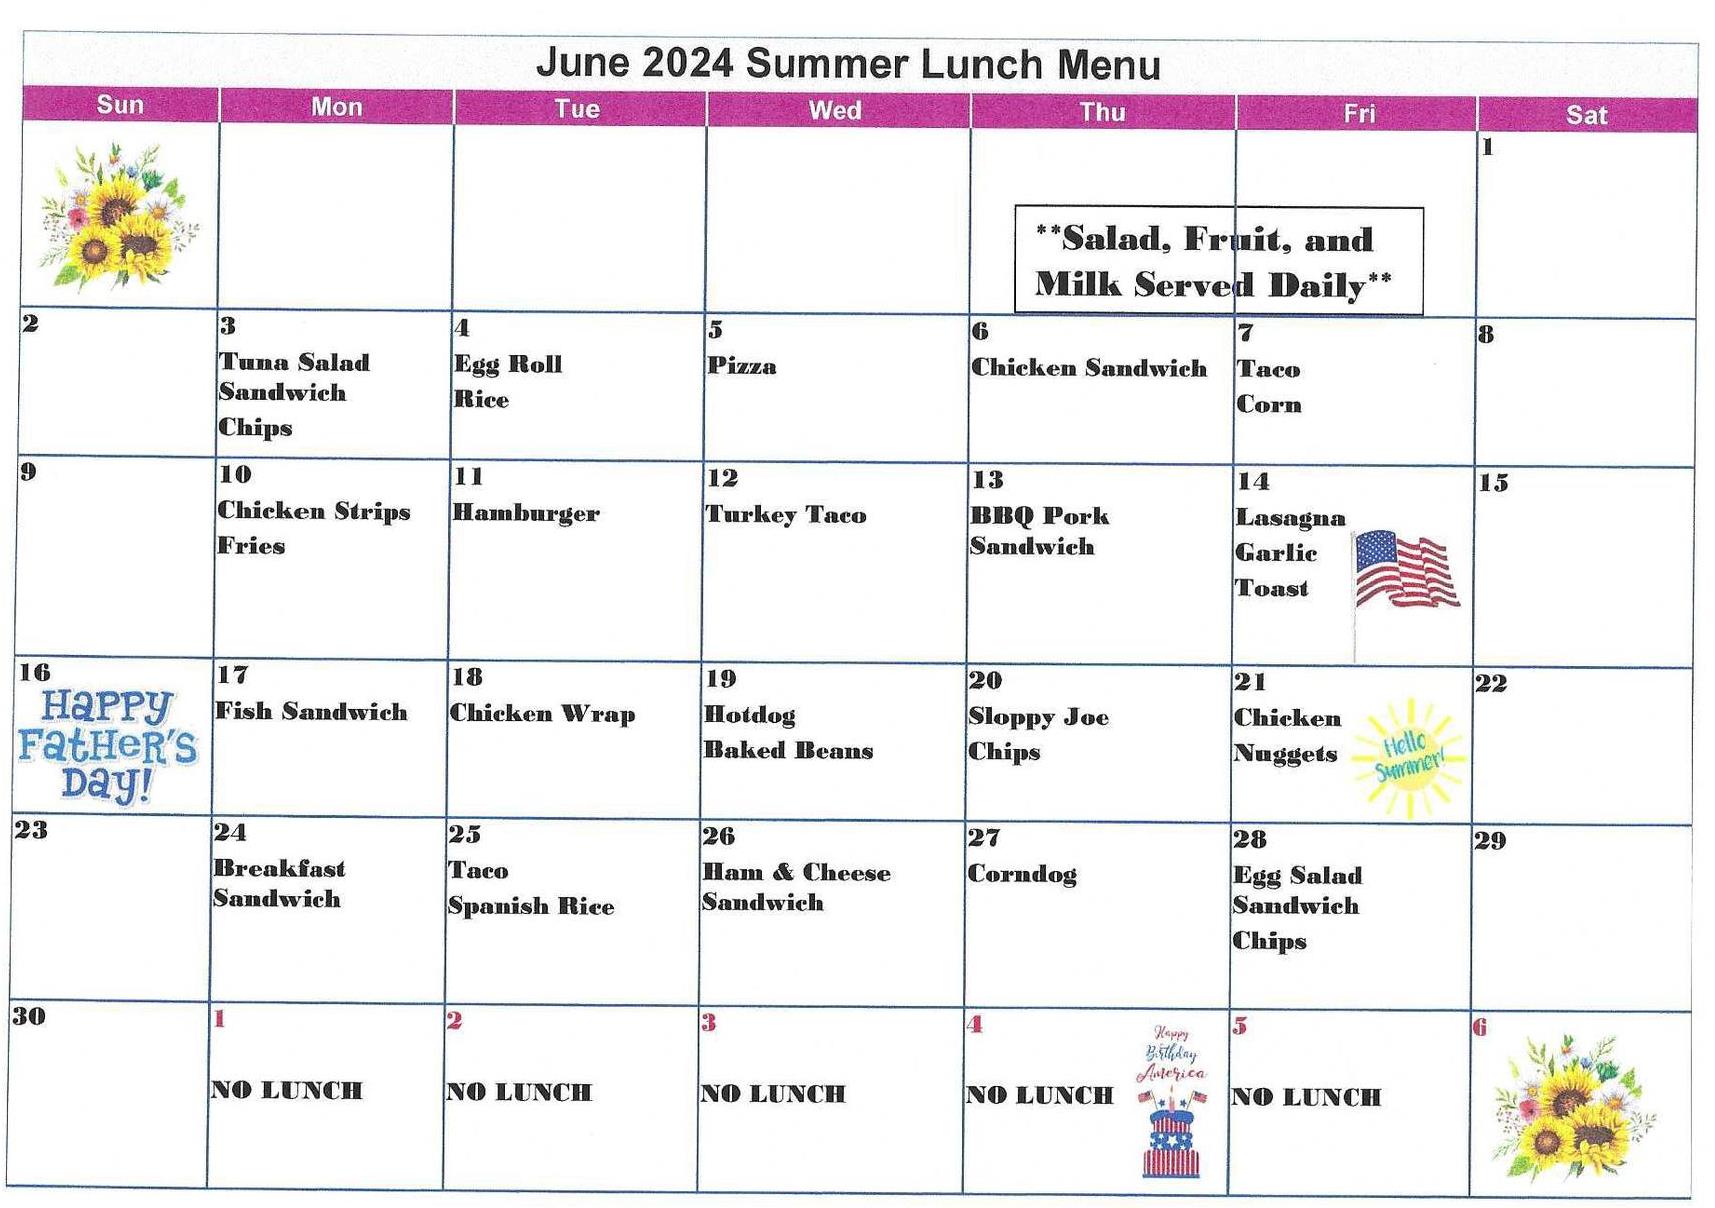 lunch menu for June 2024